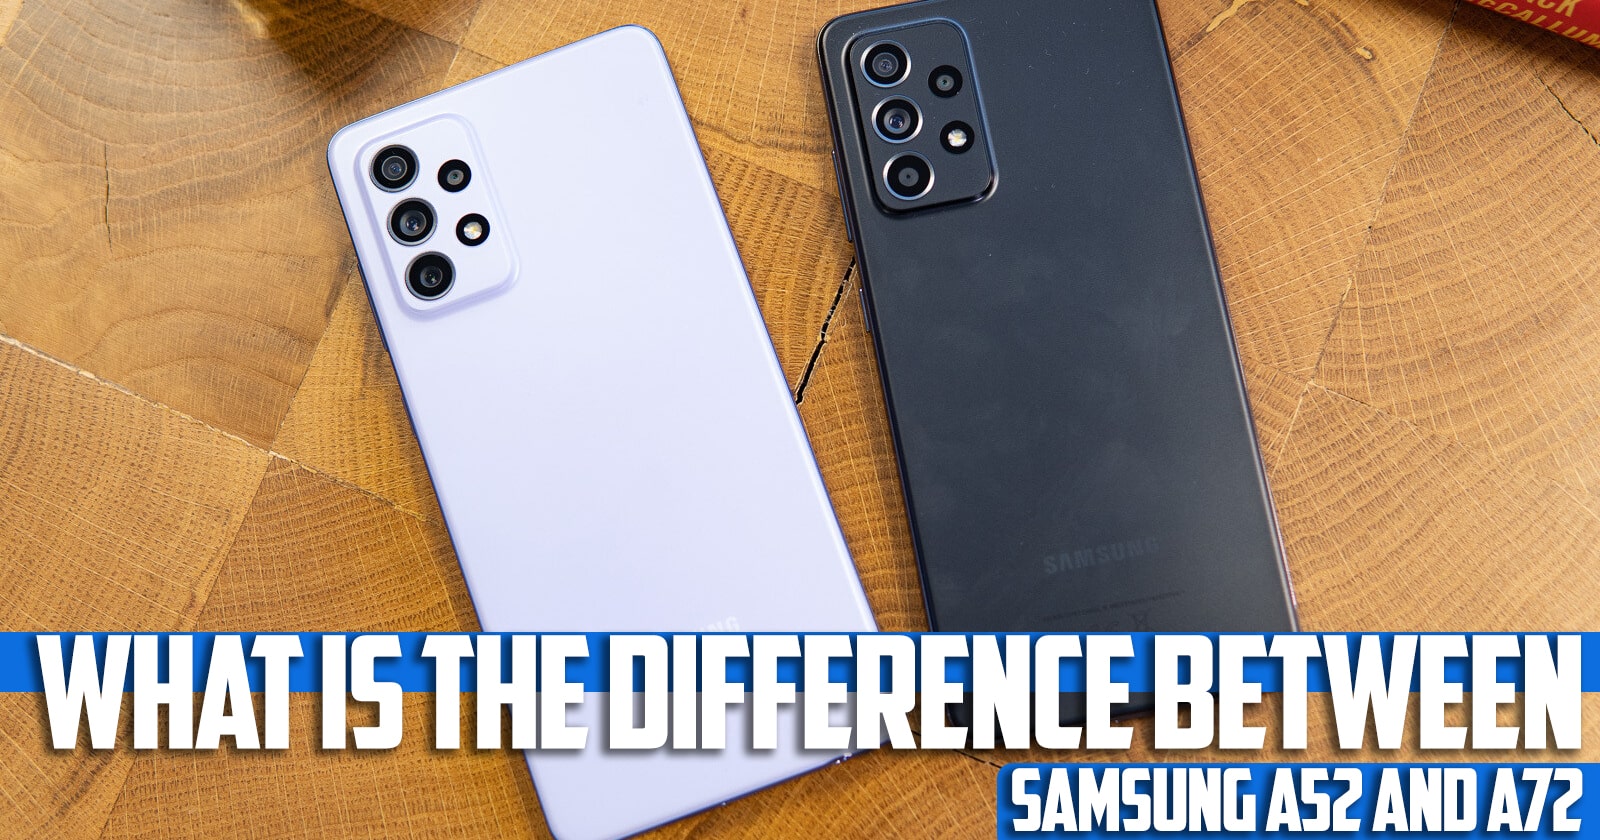 What is the difference between the Samsung a52 and a72?